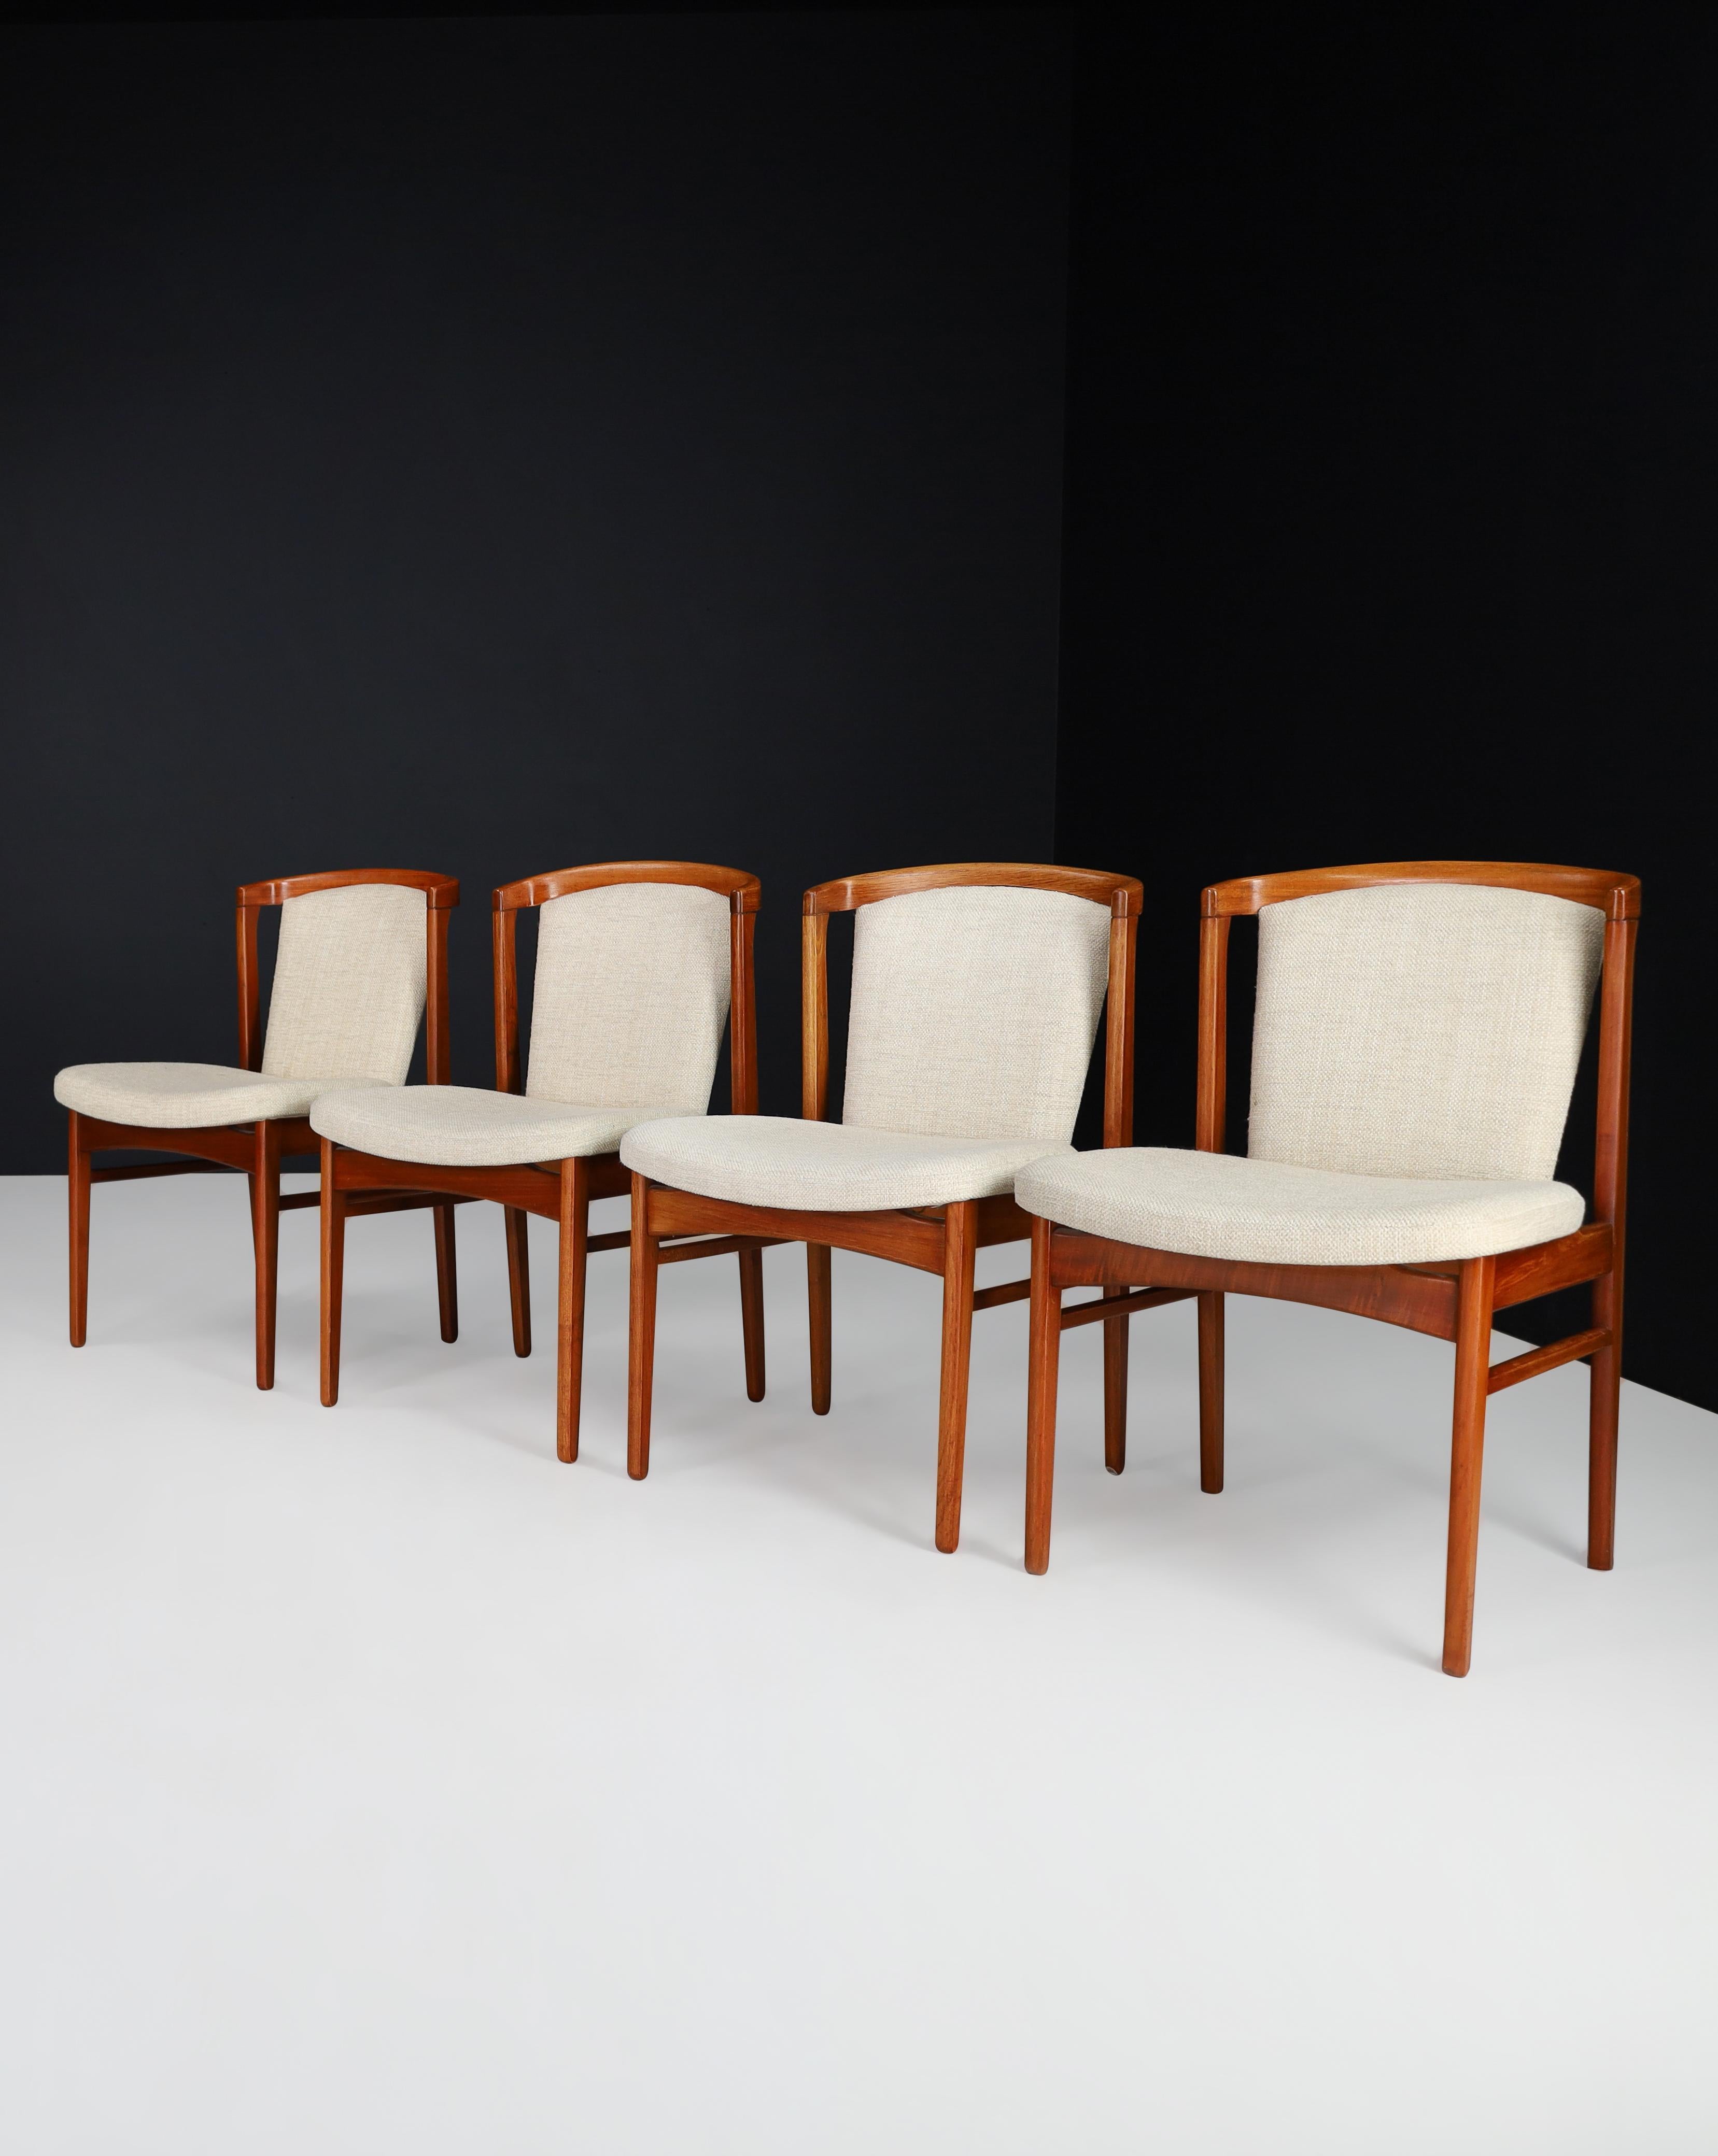 Erik Buch Dining Chairs for Orum Mobler, Denmark, 1960s For Sale 5